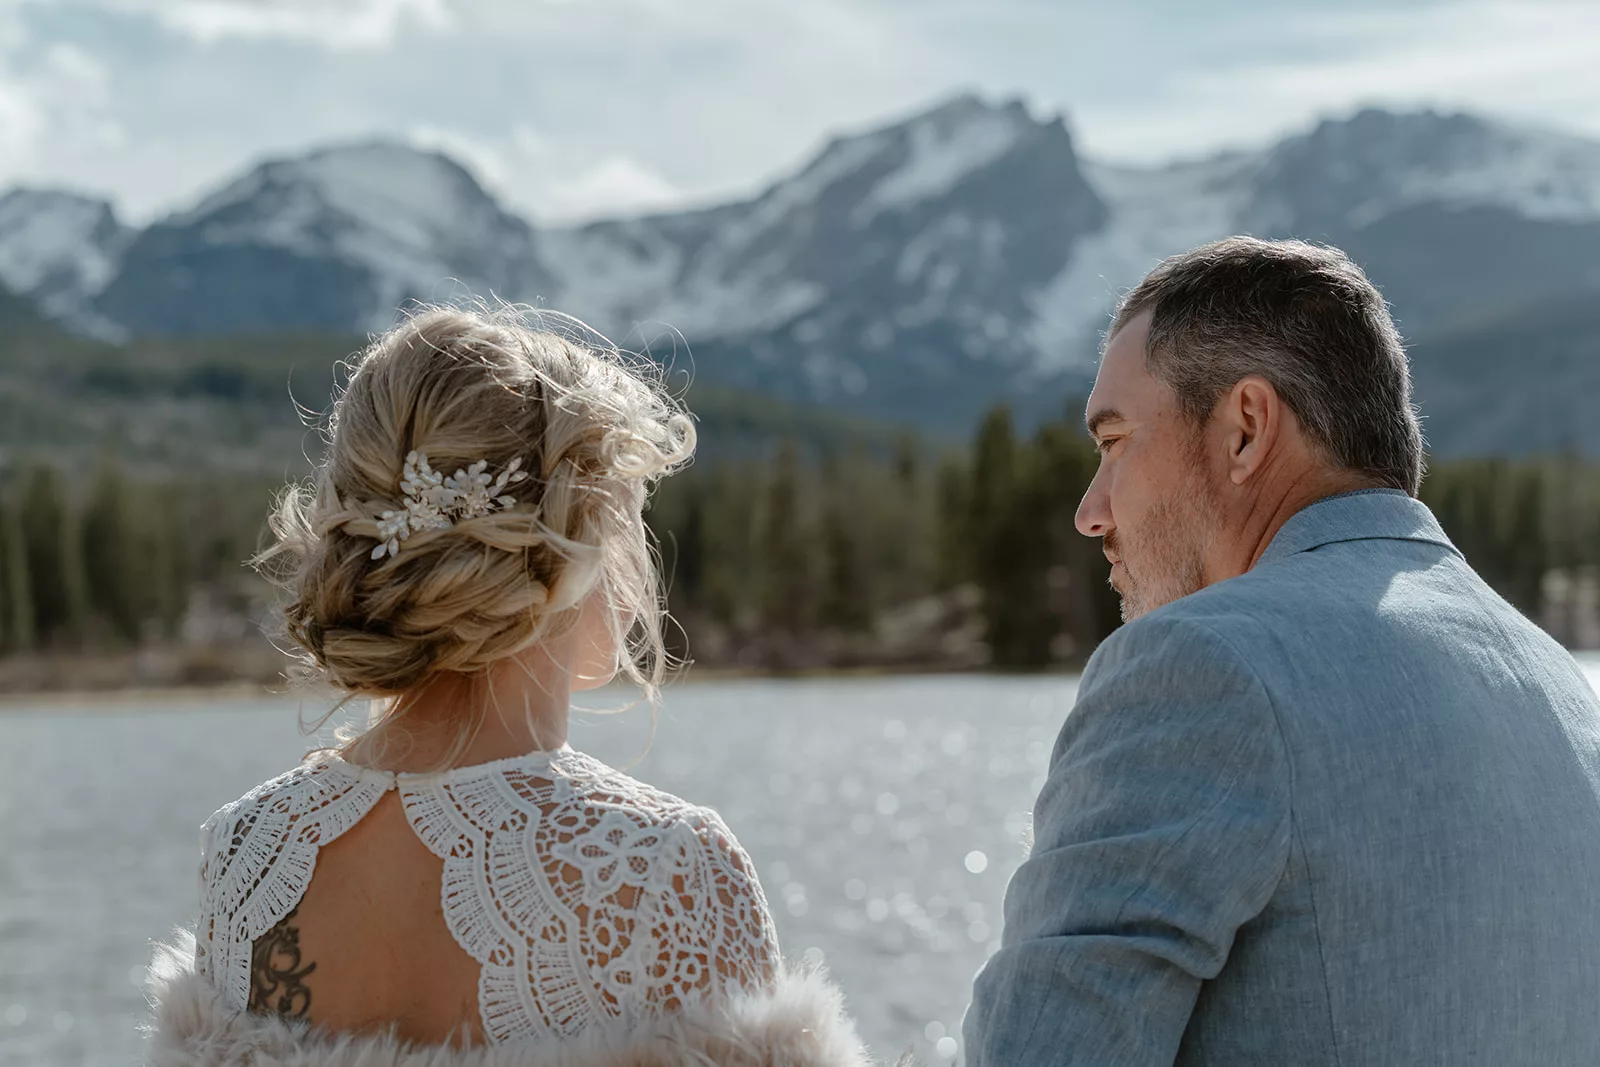 A couple ponders how to blend their non-traditional elopement with traditional elements.